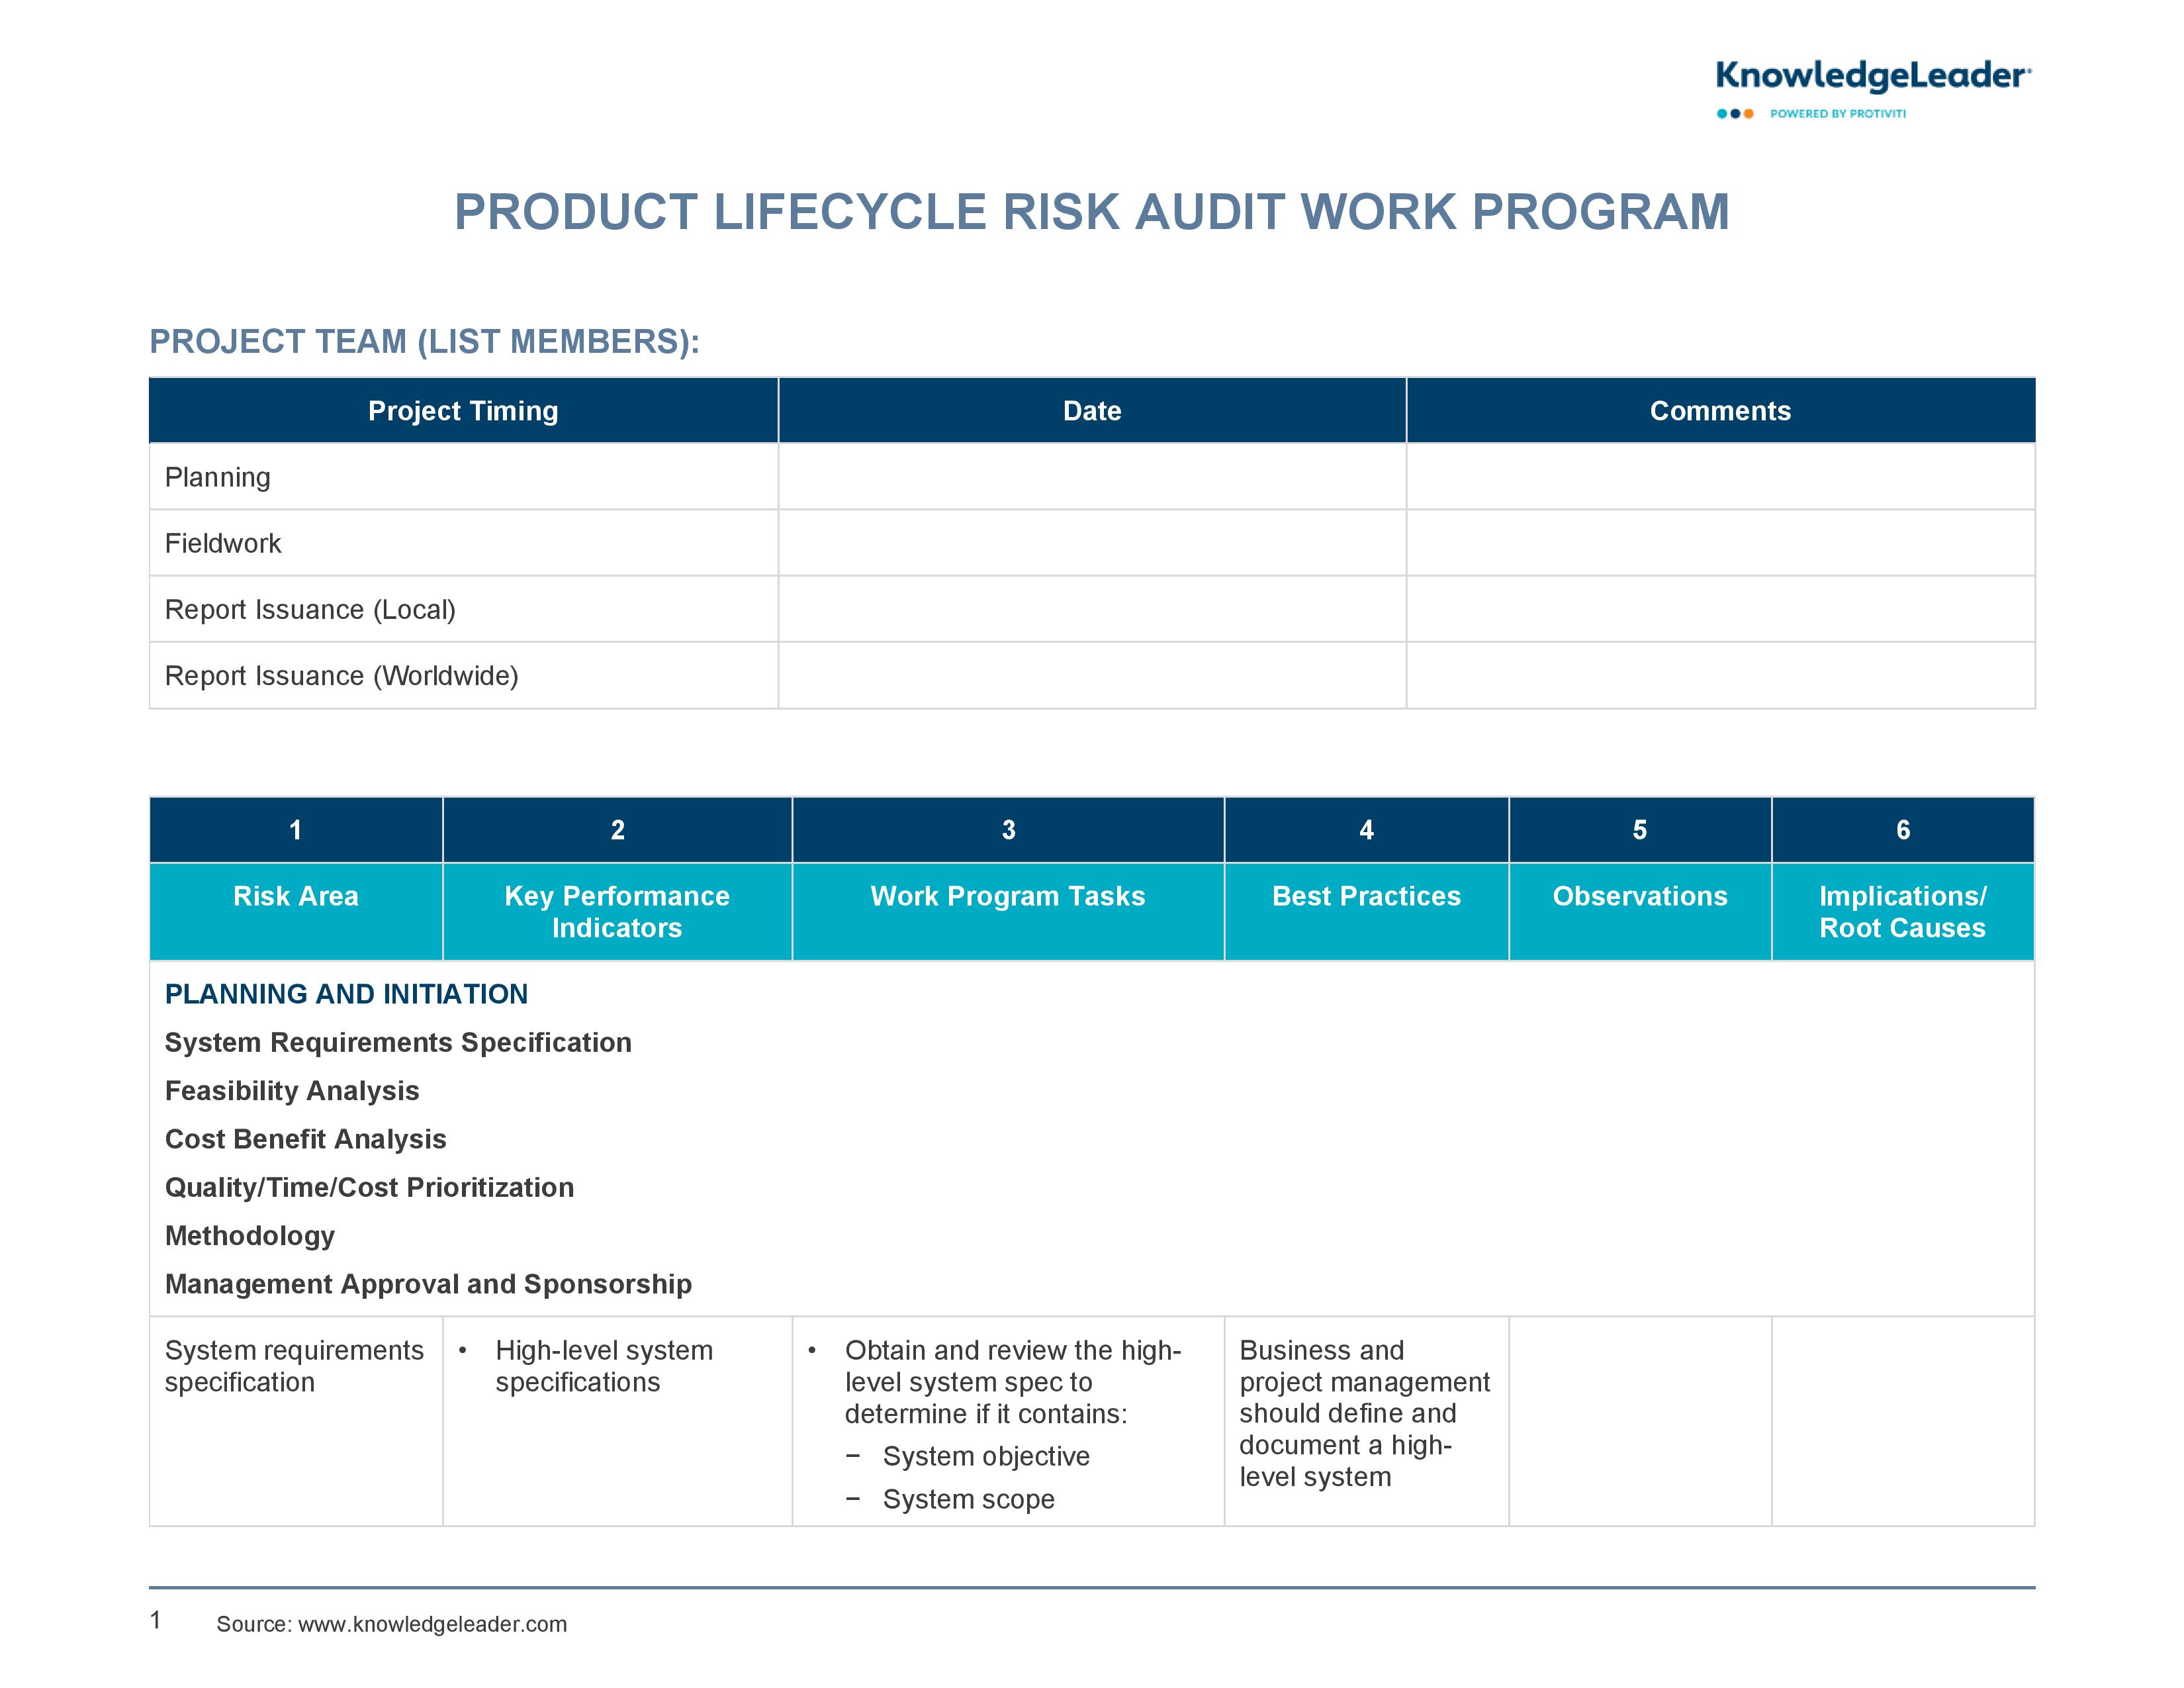 Screenshot of the first page of Product Lifecycle Risk Audit Work Program